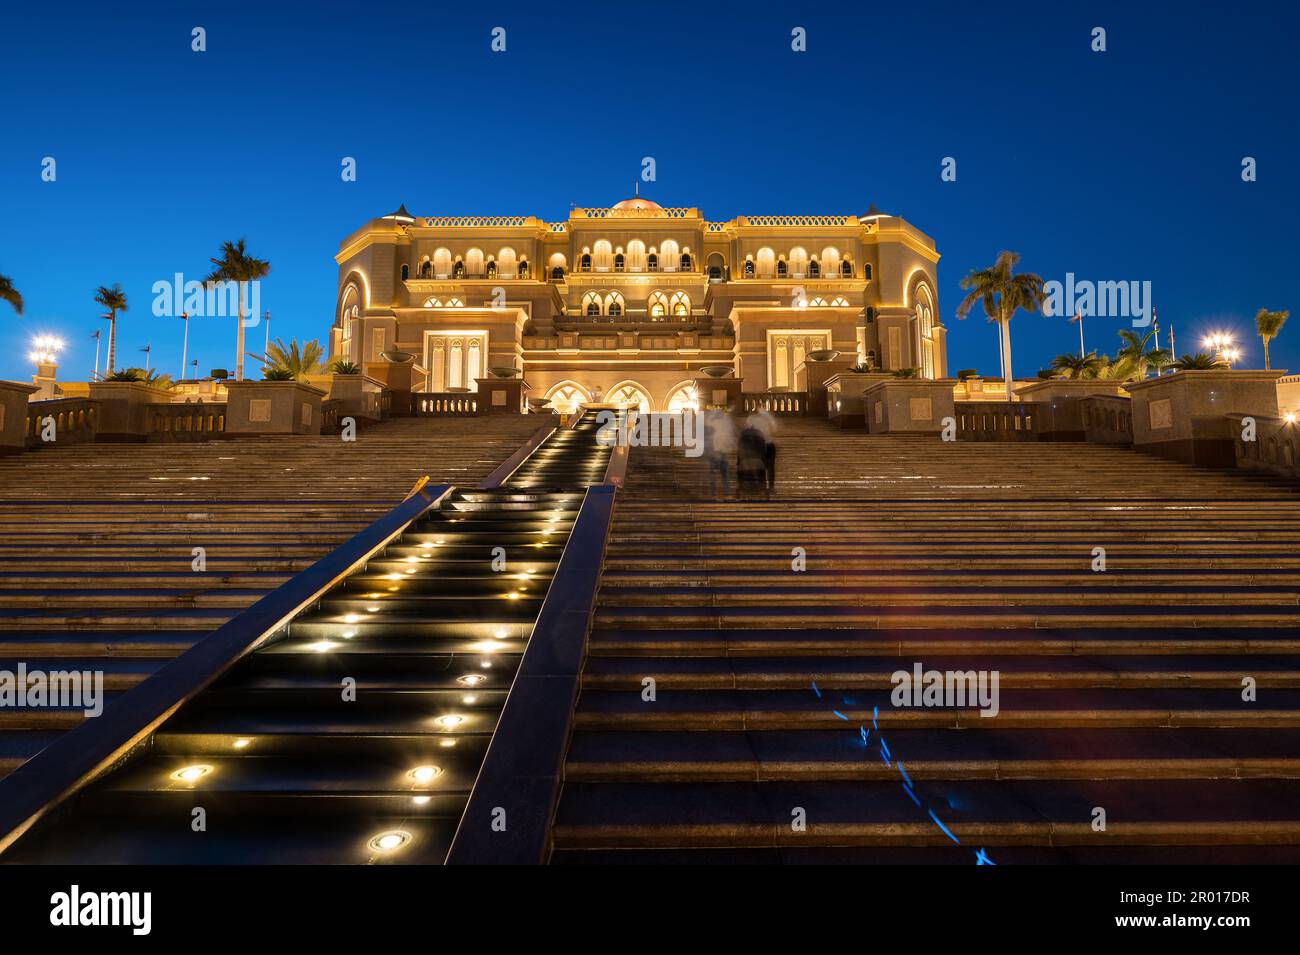 Abu Dhabi, United Arab Emirates - April 5, 2021: Emirates palace entrance in Abu Dhabi , night view of one of the famous travel spots and landmarks in Stock Photo